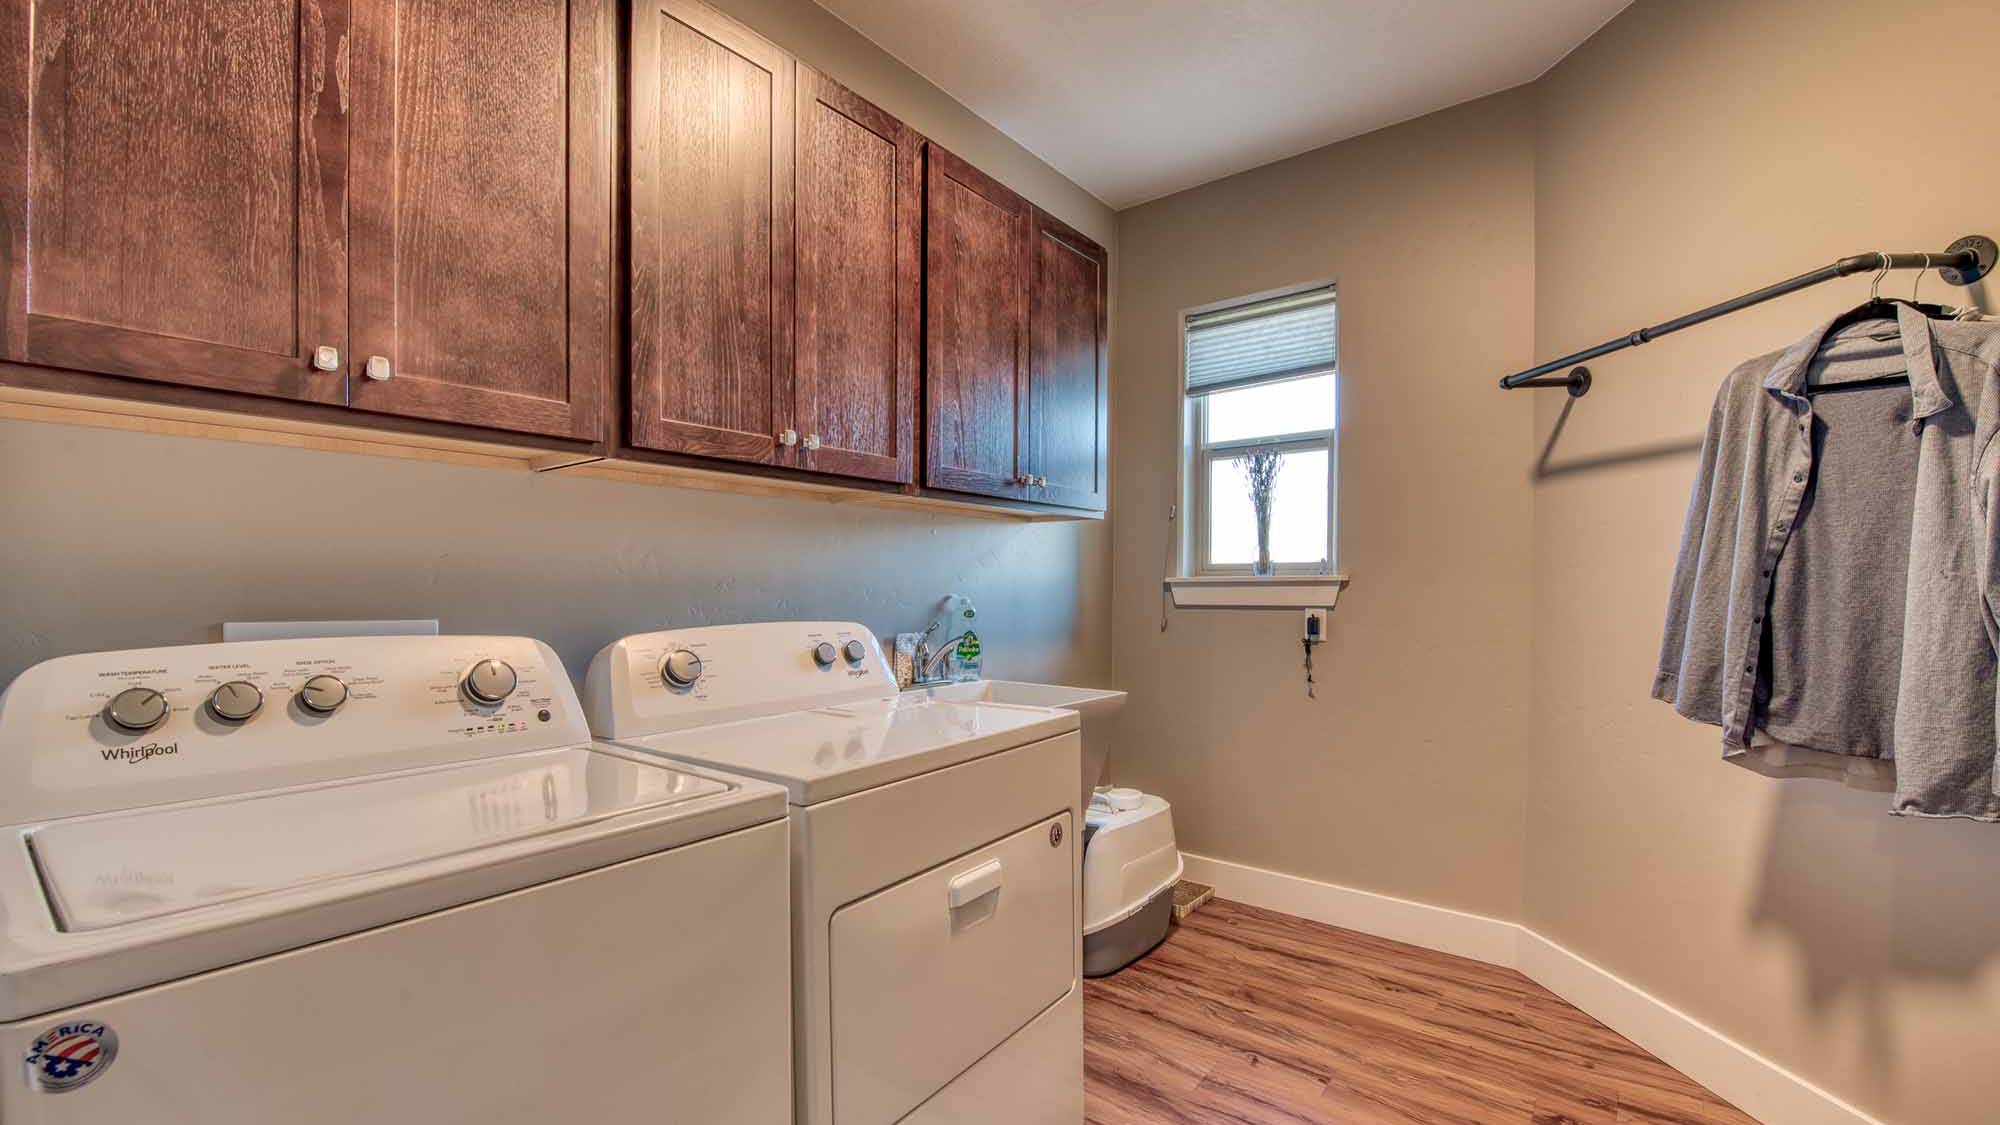 Laundry room in The Copper Creek model home - Built by Big Sky Builder in Florence, MT